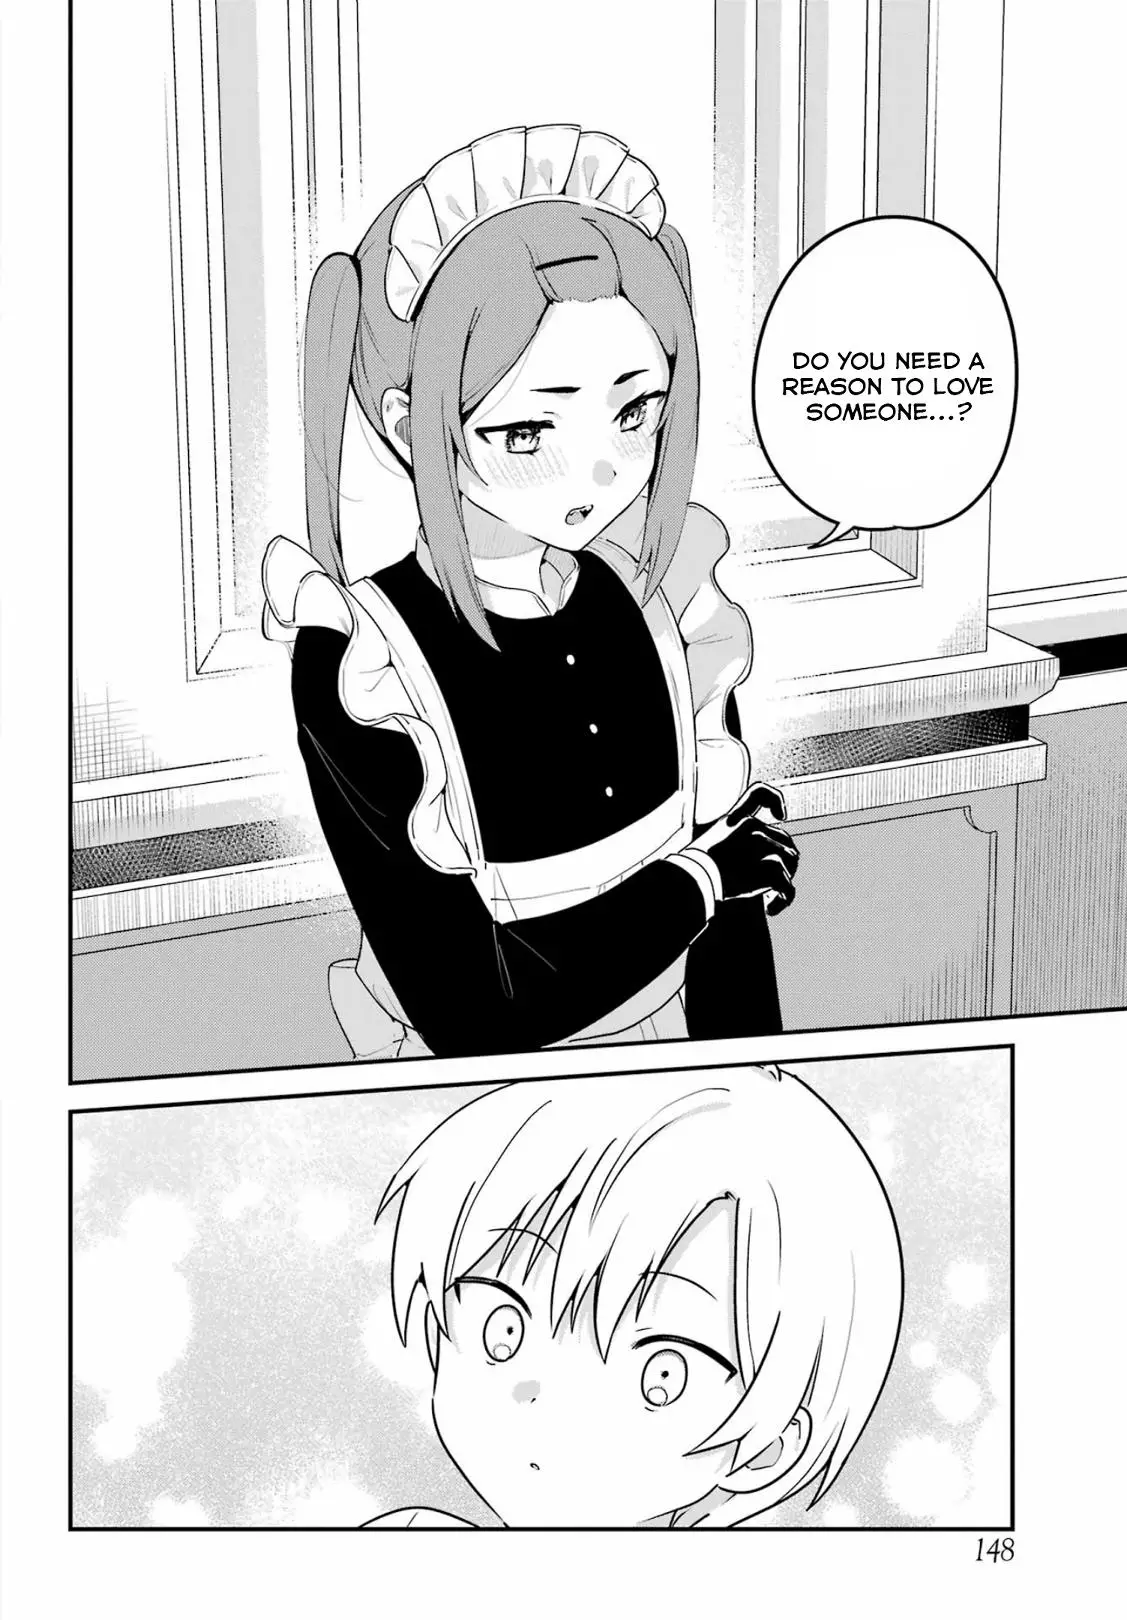 My Recently Hired Maid Is Suspicious - 57 page 6-9724394f